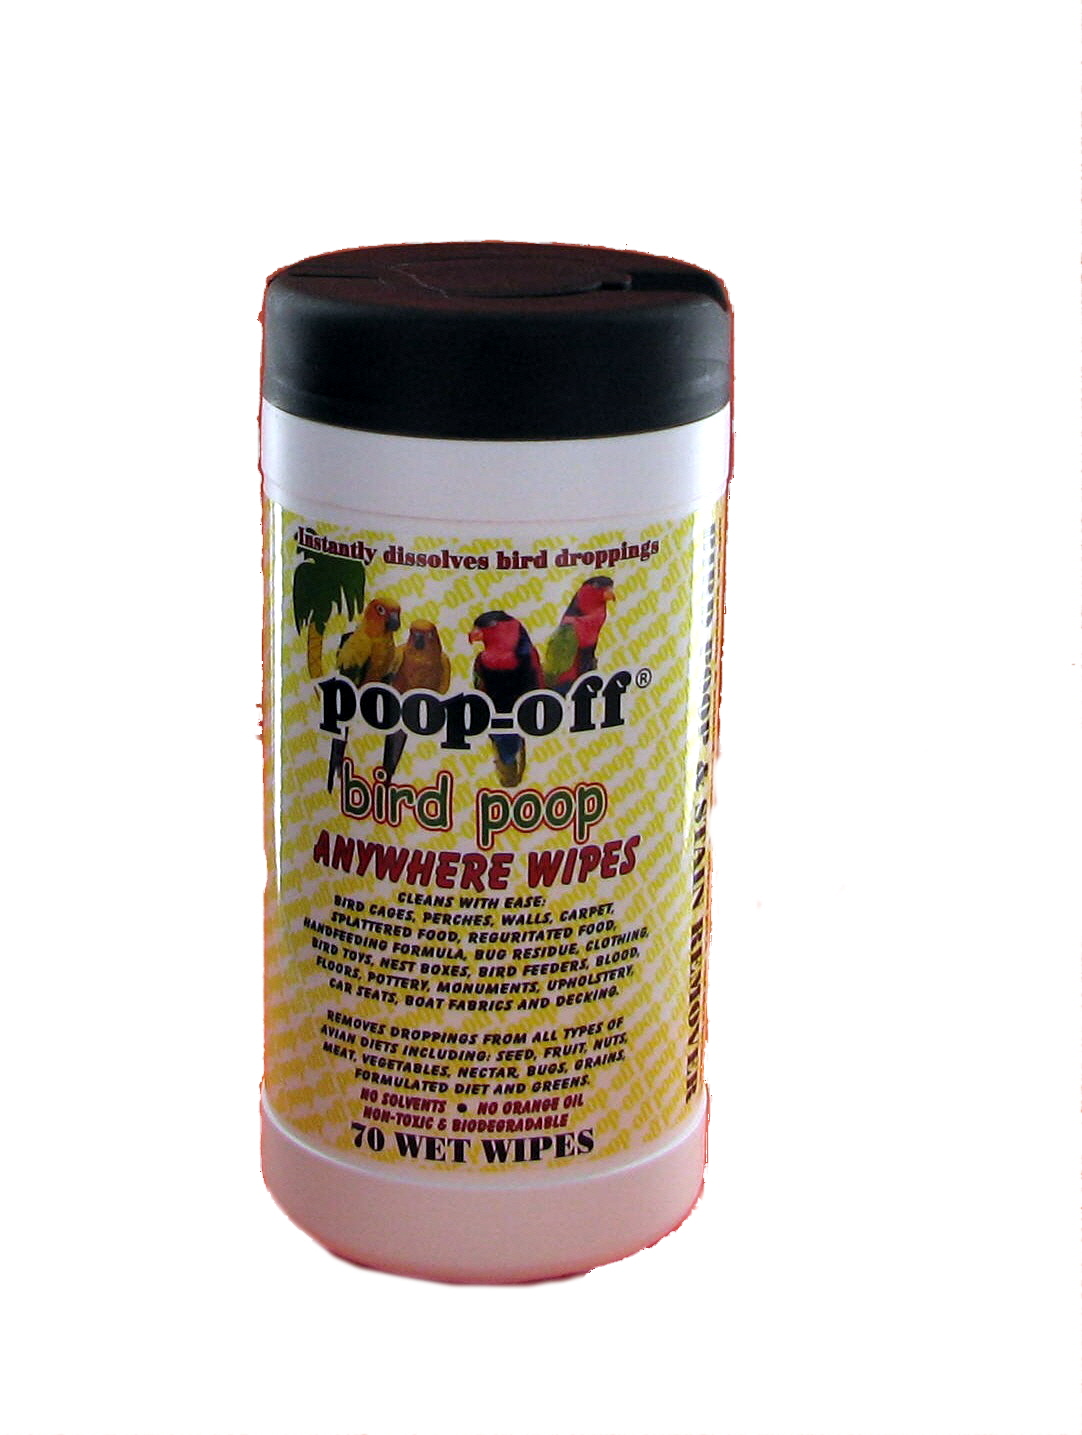 Poop Off Bird Poop Remover from Bird Cages, Perches, Walls, Carpet